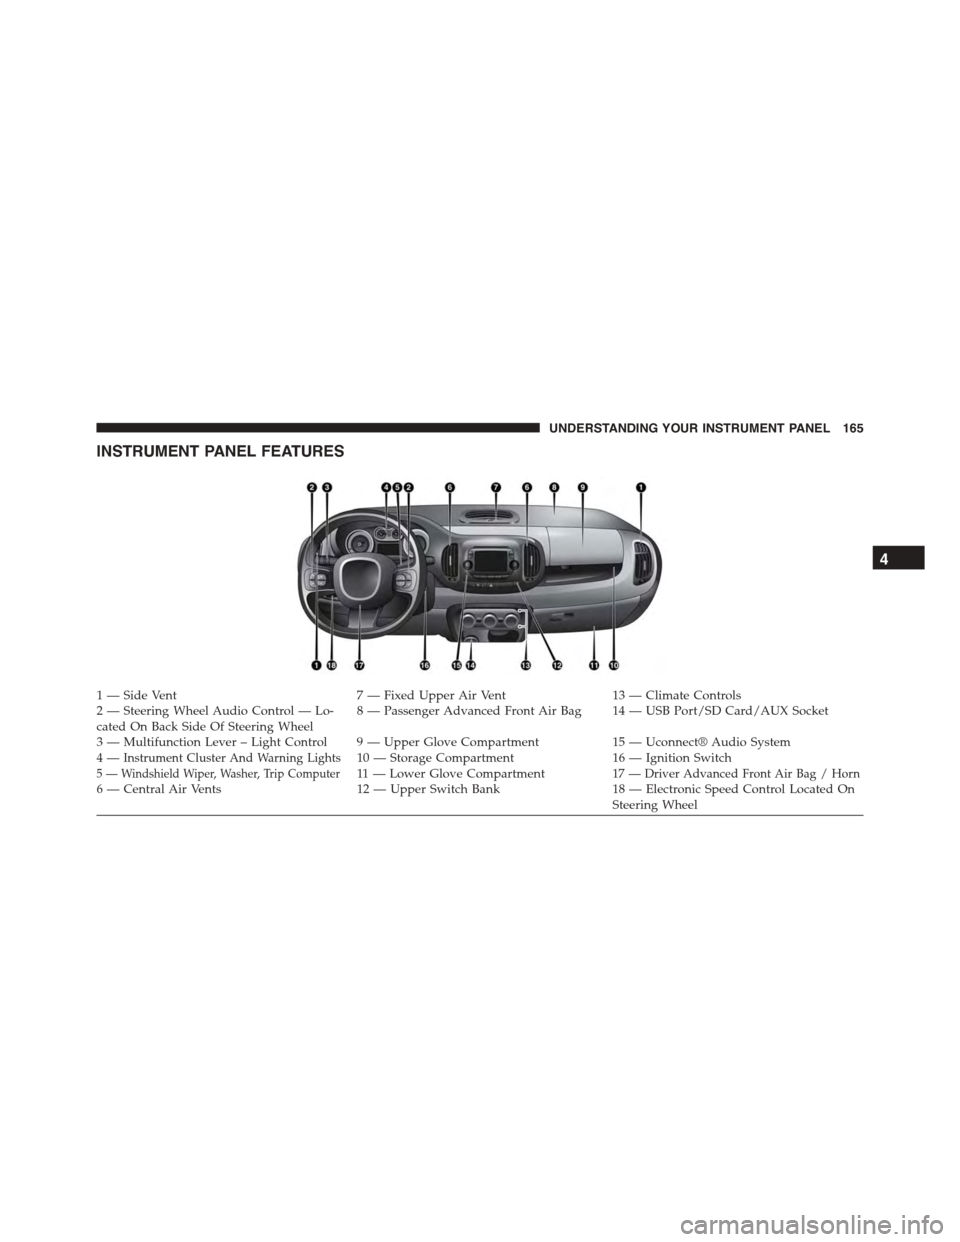 FIAT 500L 2015 2.G Owners Manual INSTRUMENT PANEL FEATURES
1 — Side Vent7 — Fixed Upper Air Vent13 — Climate Controls2—SteeringWheelAudioControl—Lo-cated On Back Side Of Steering Wheel8—PassengerAdvancedFrontAirBag 14—U